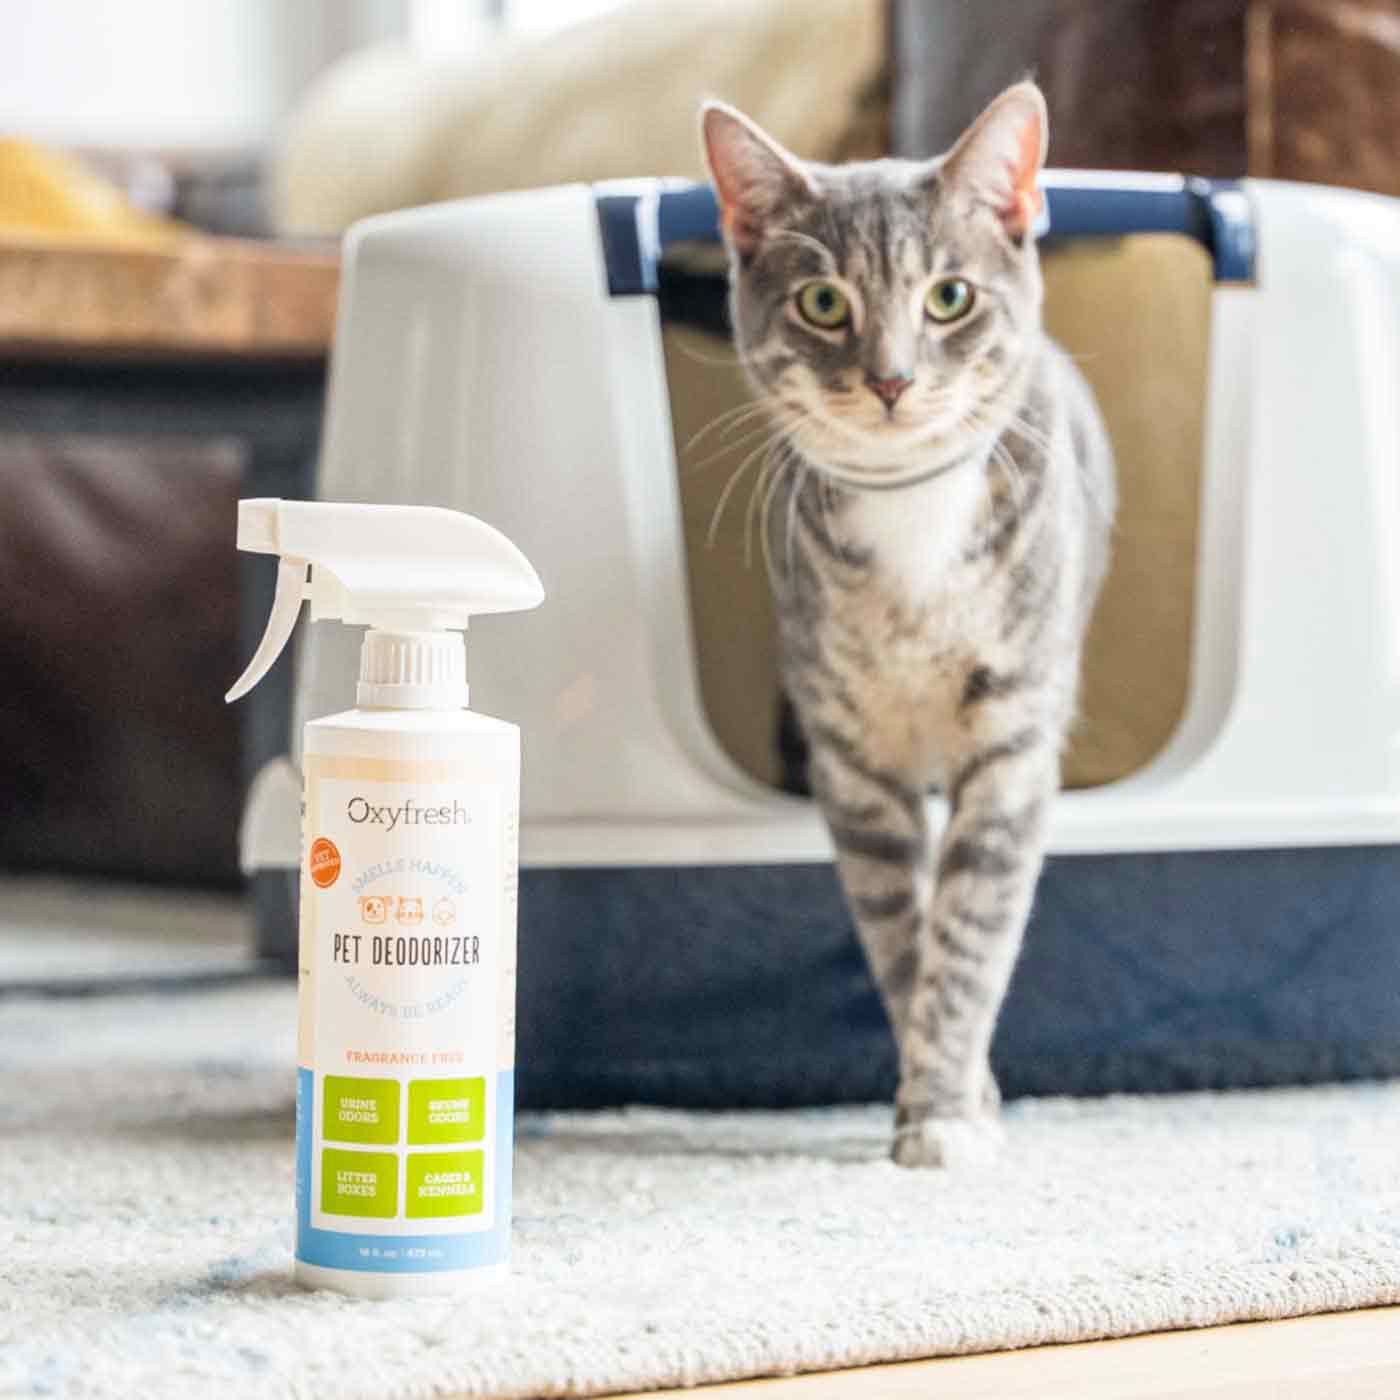 cat exiting litterbox with oxyfresh pet deodorizer bottle